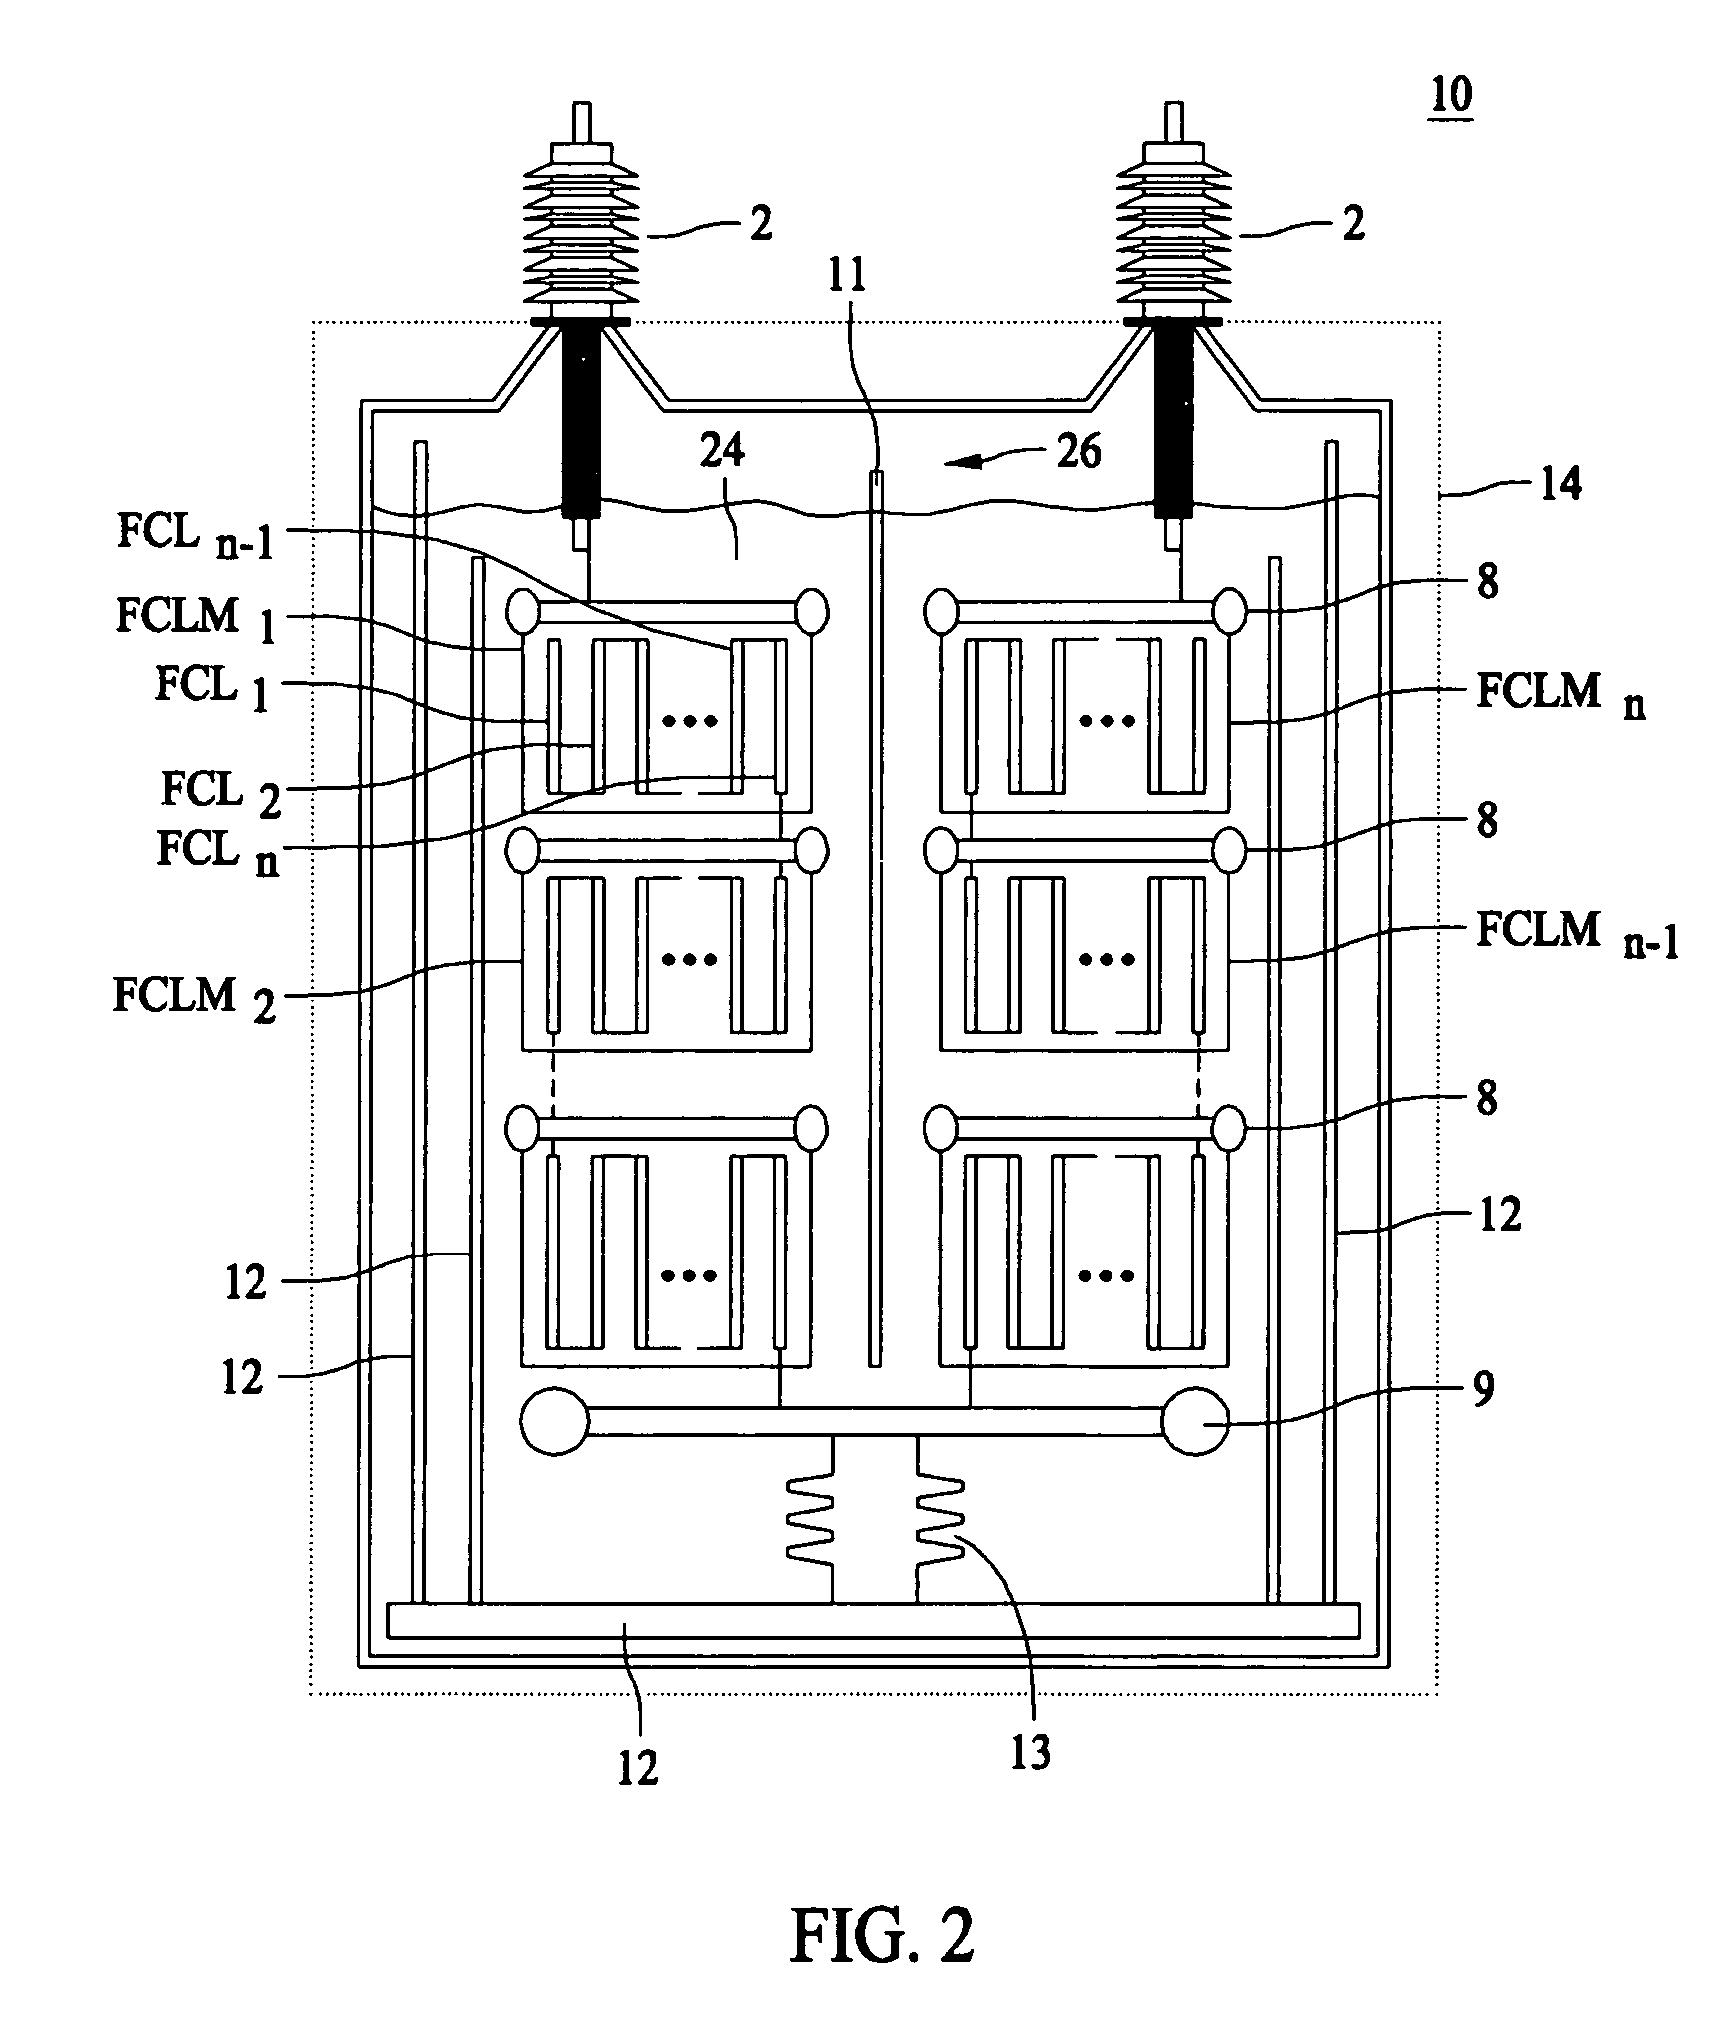 High voltage design structure for high temperature superconducting device